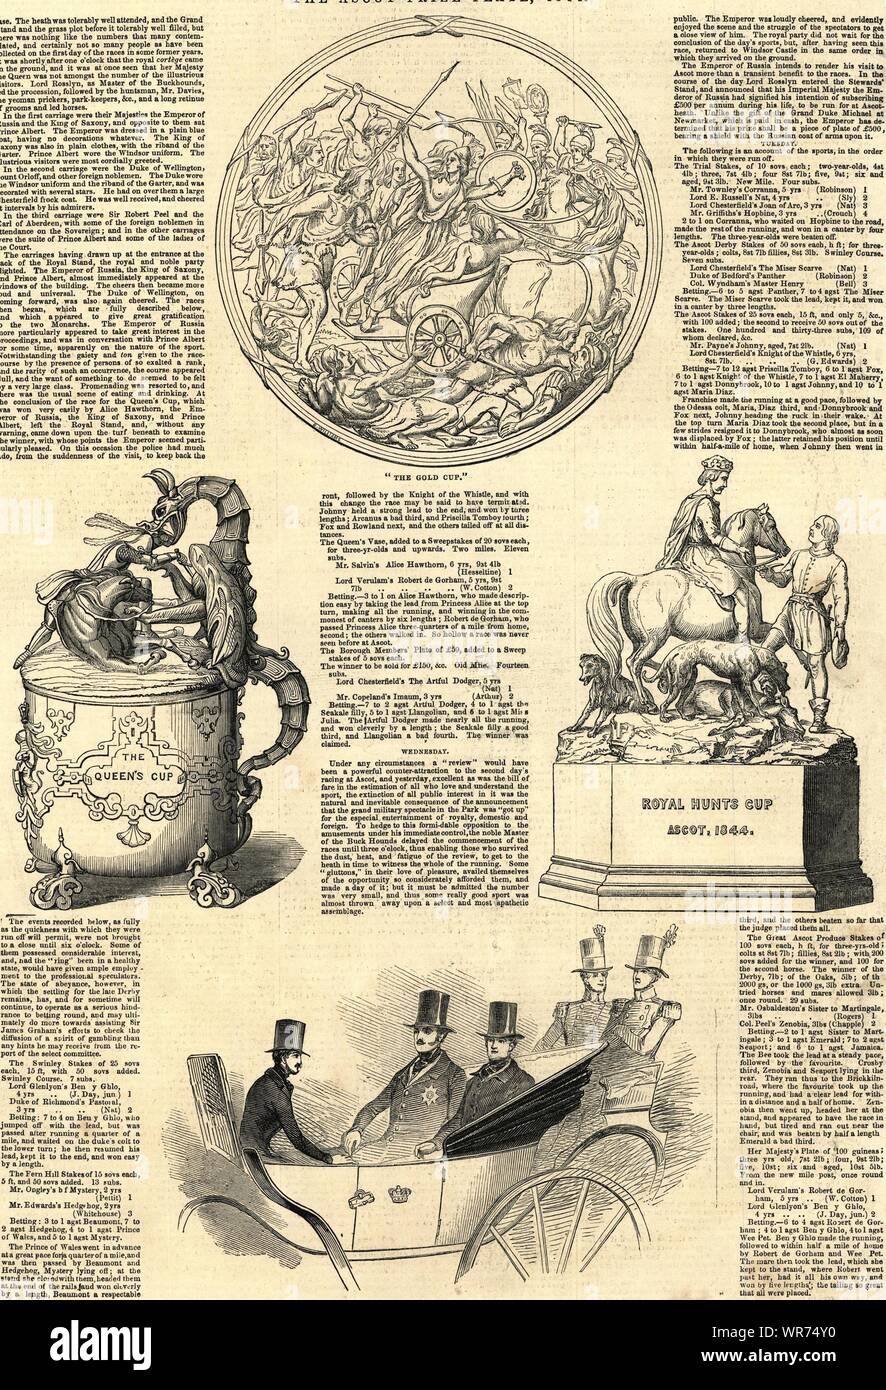 Ascot races. Prize Plate Gold Cup Royal Hunts Cup. Czar Russia King Saxony 1844 Stock Photo